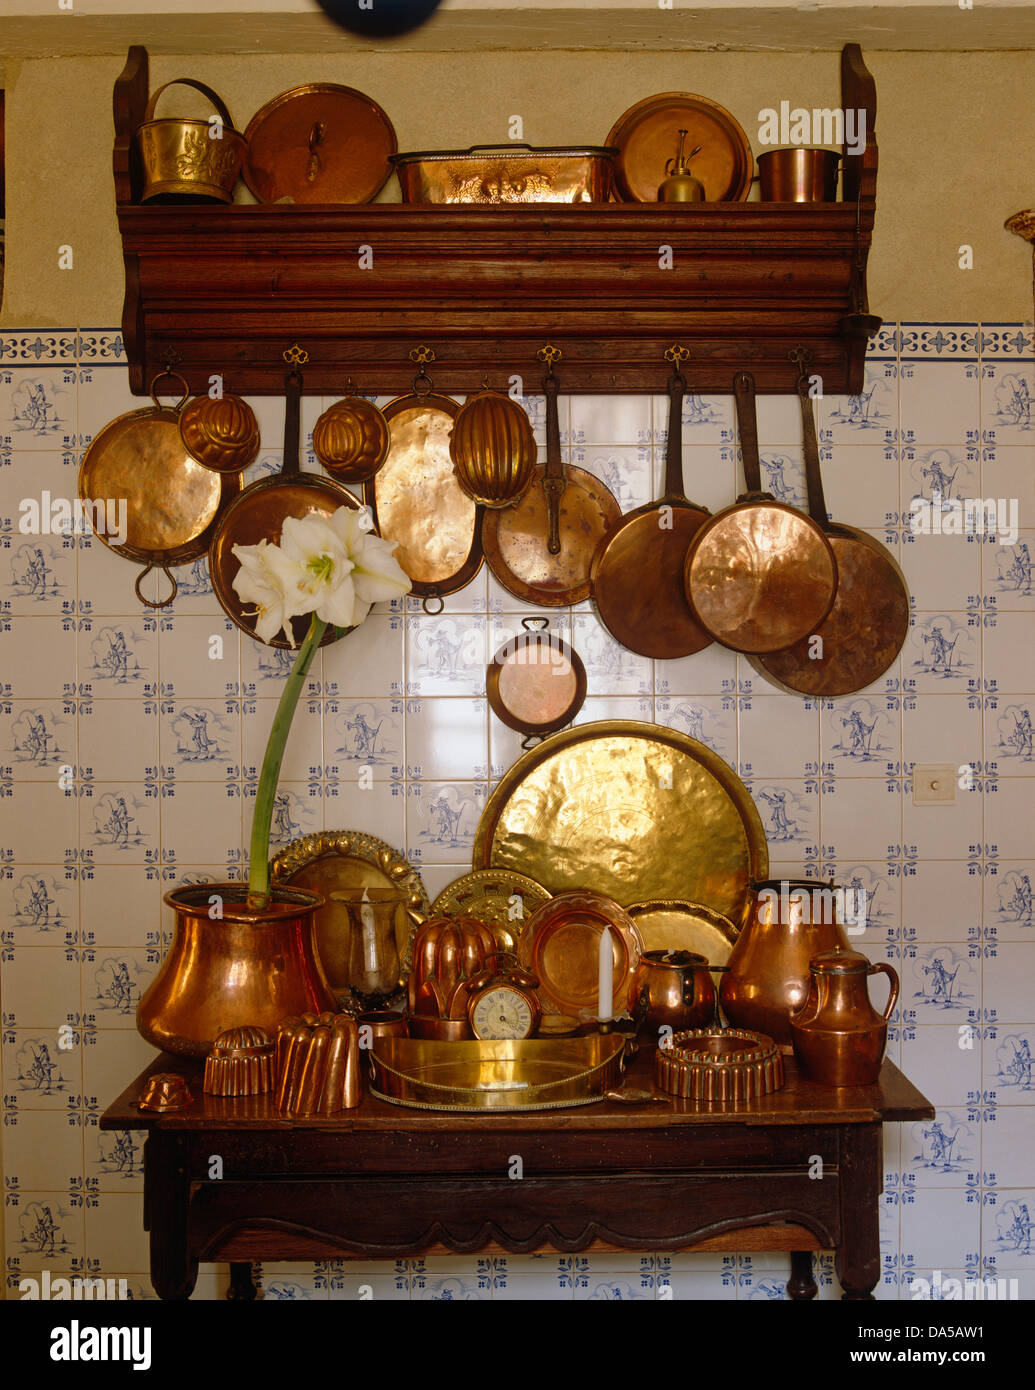 https://c8.alamy.com/comp/DA5AW1/close-up-of-collection-of-antique-copper-pots-and-pans-hanging-from-DA5AW1.jpg